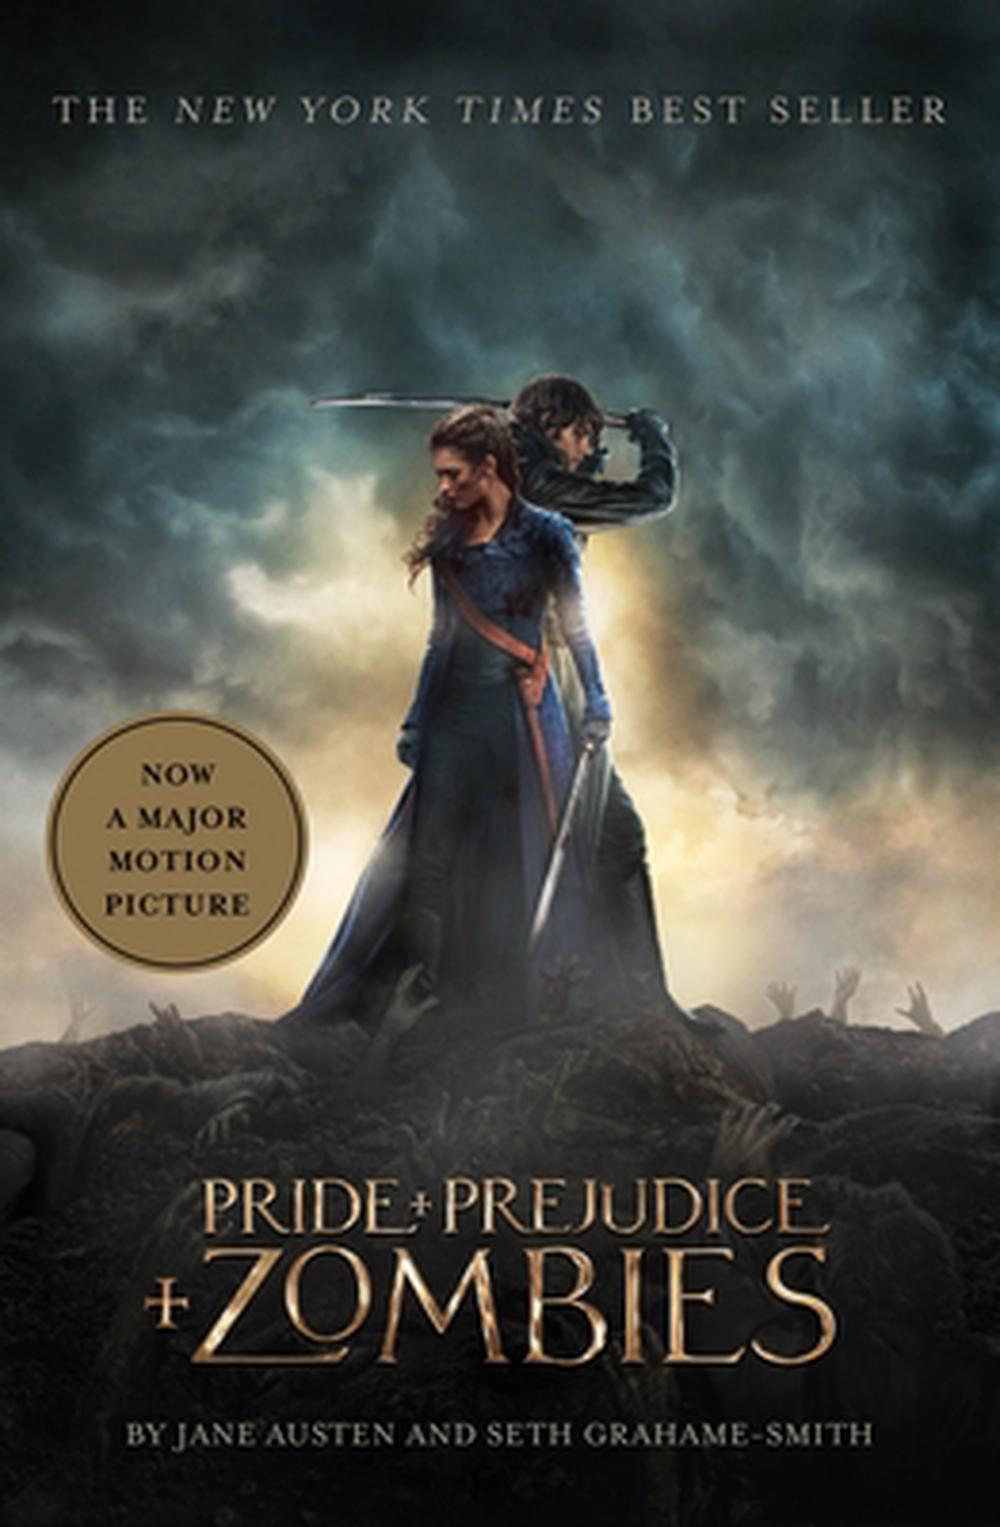 pride prejudice and zombies book review